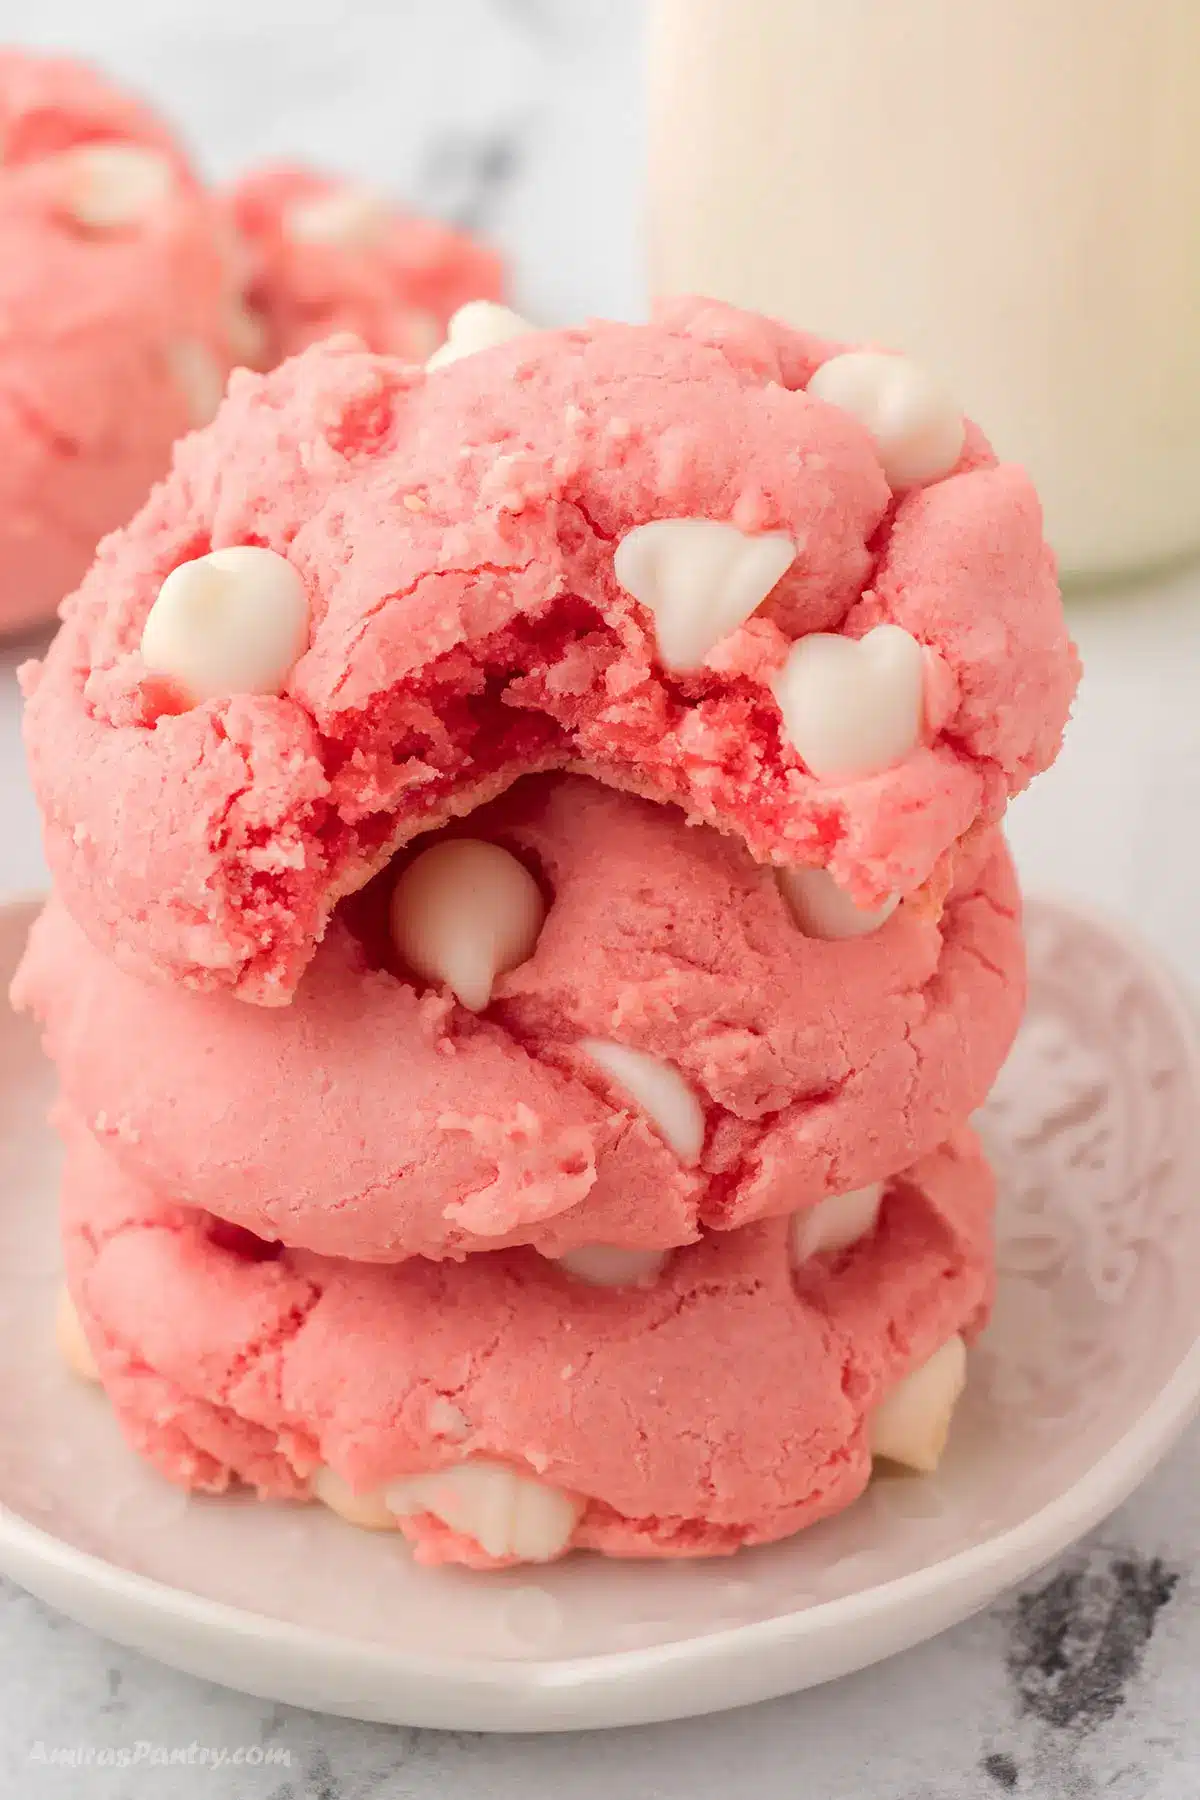 A stack of strawberry cookies with a bite taken from the top one.